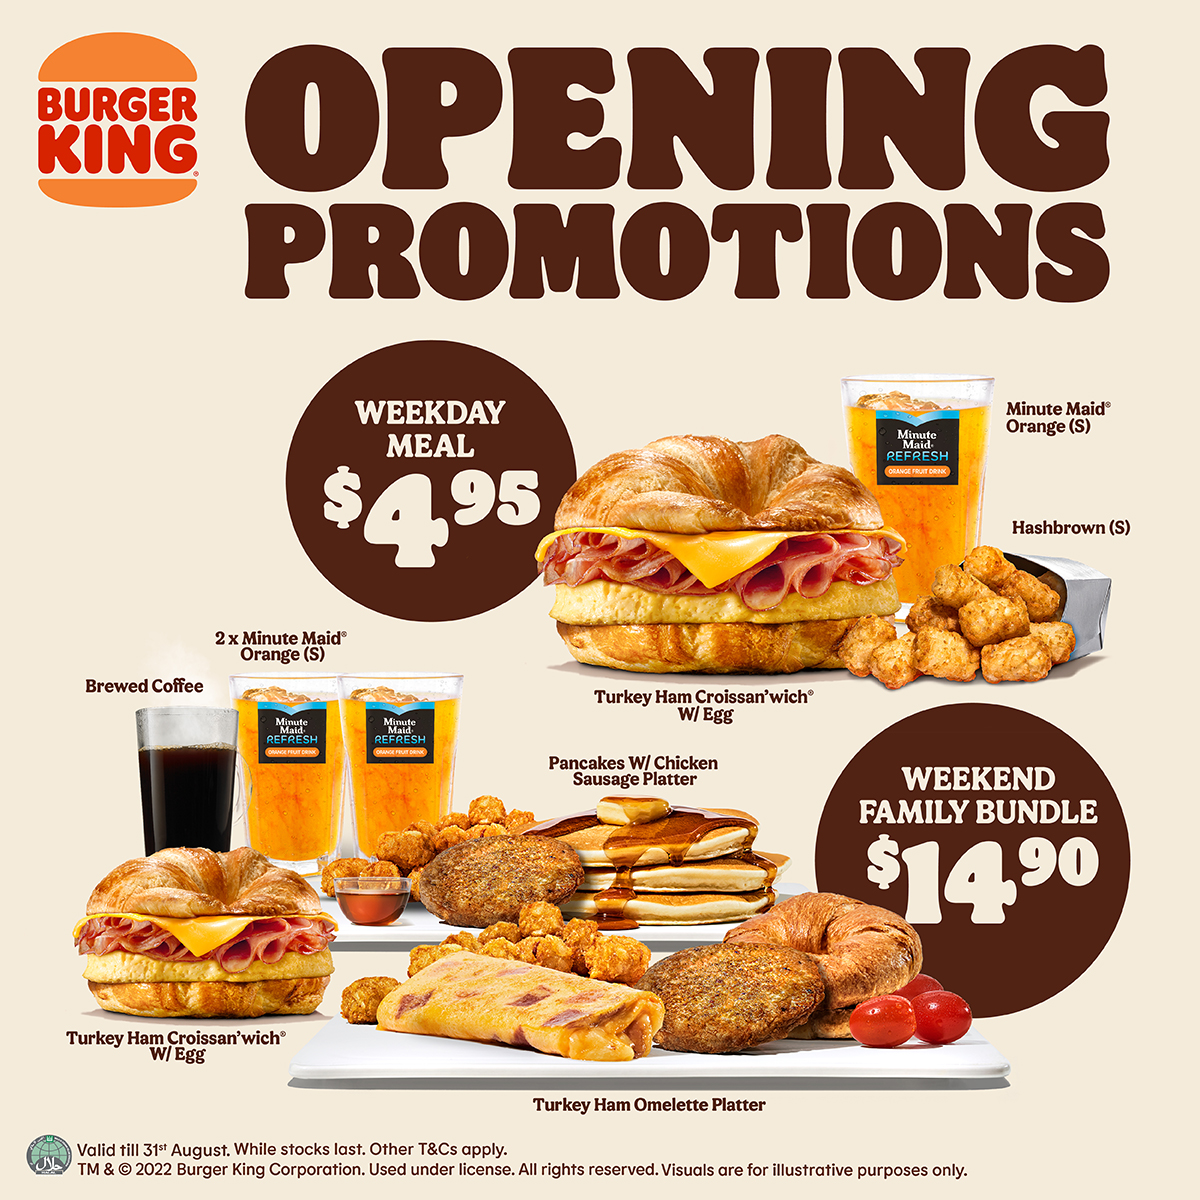 Burger King Opening Promotions